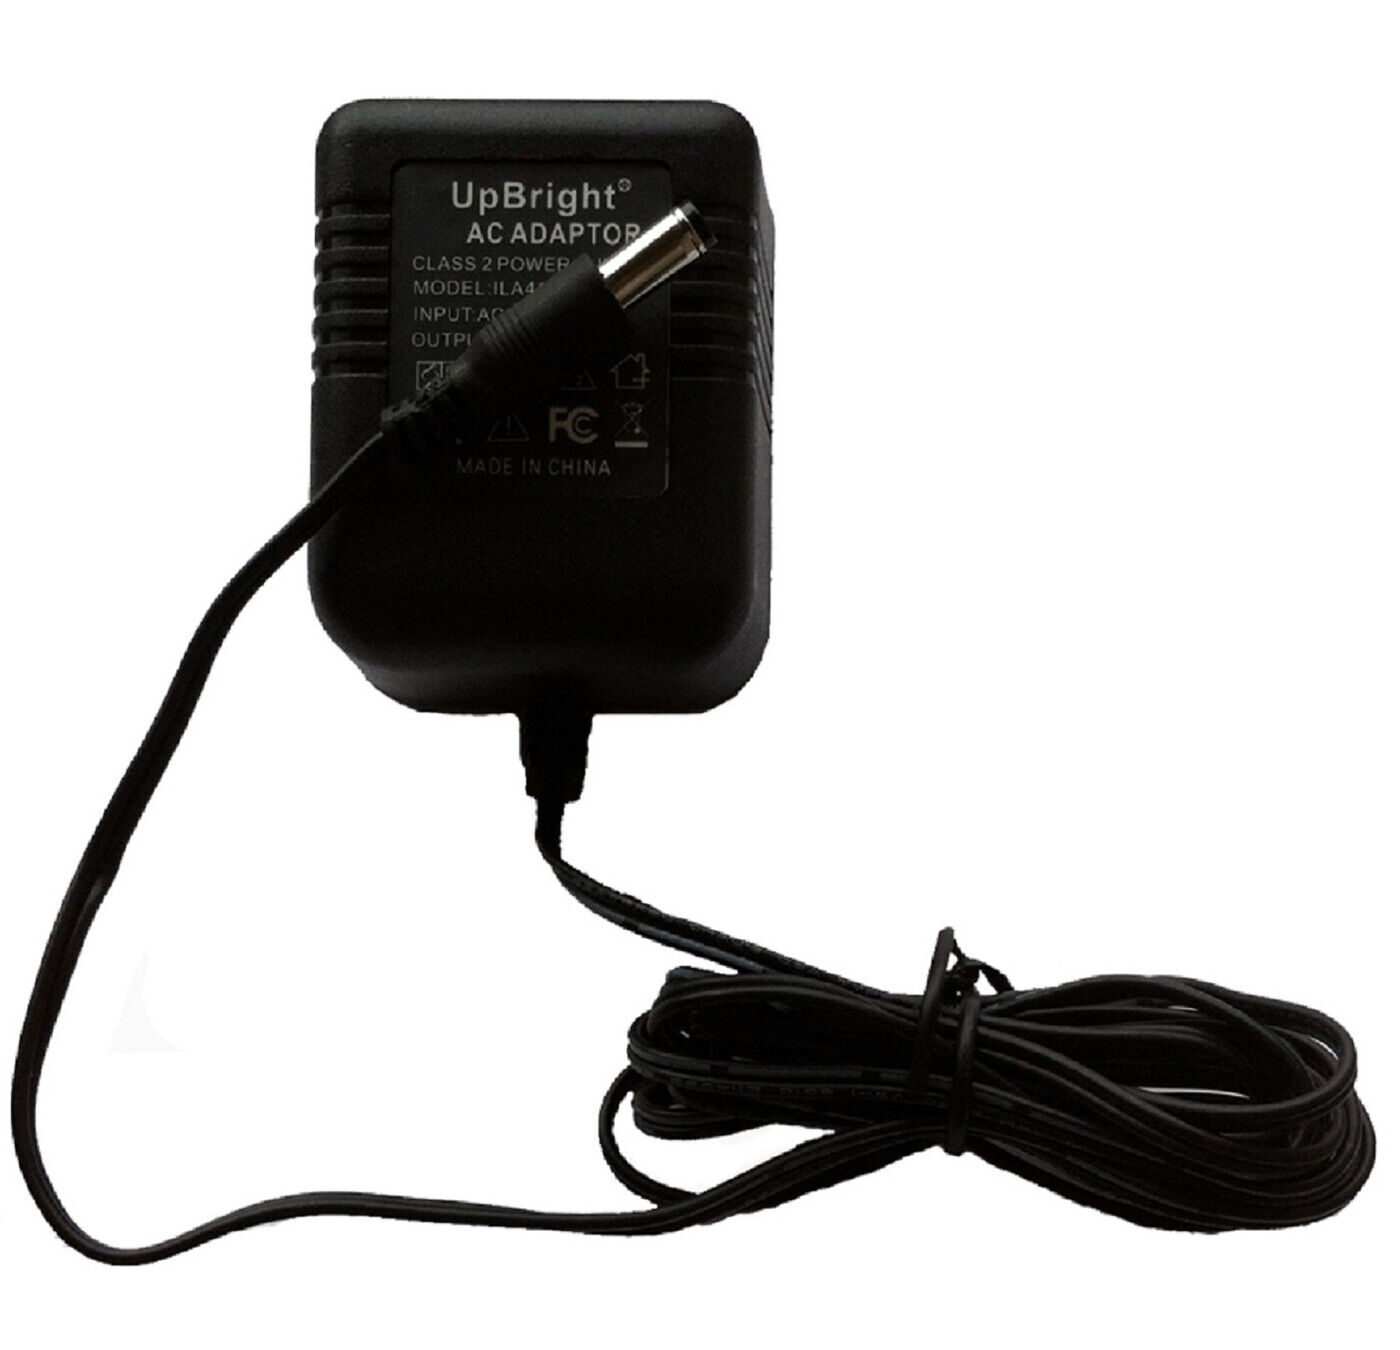 AC Adapter For Samson Model AC16 Q5 5 Channel Headphone Amp Charger Power Supply